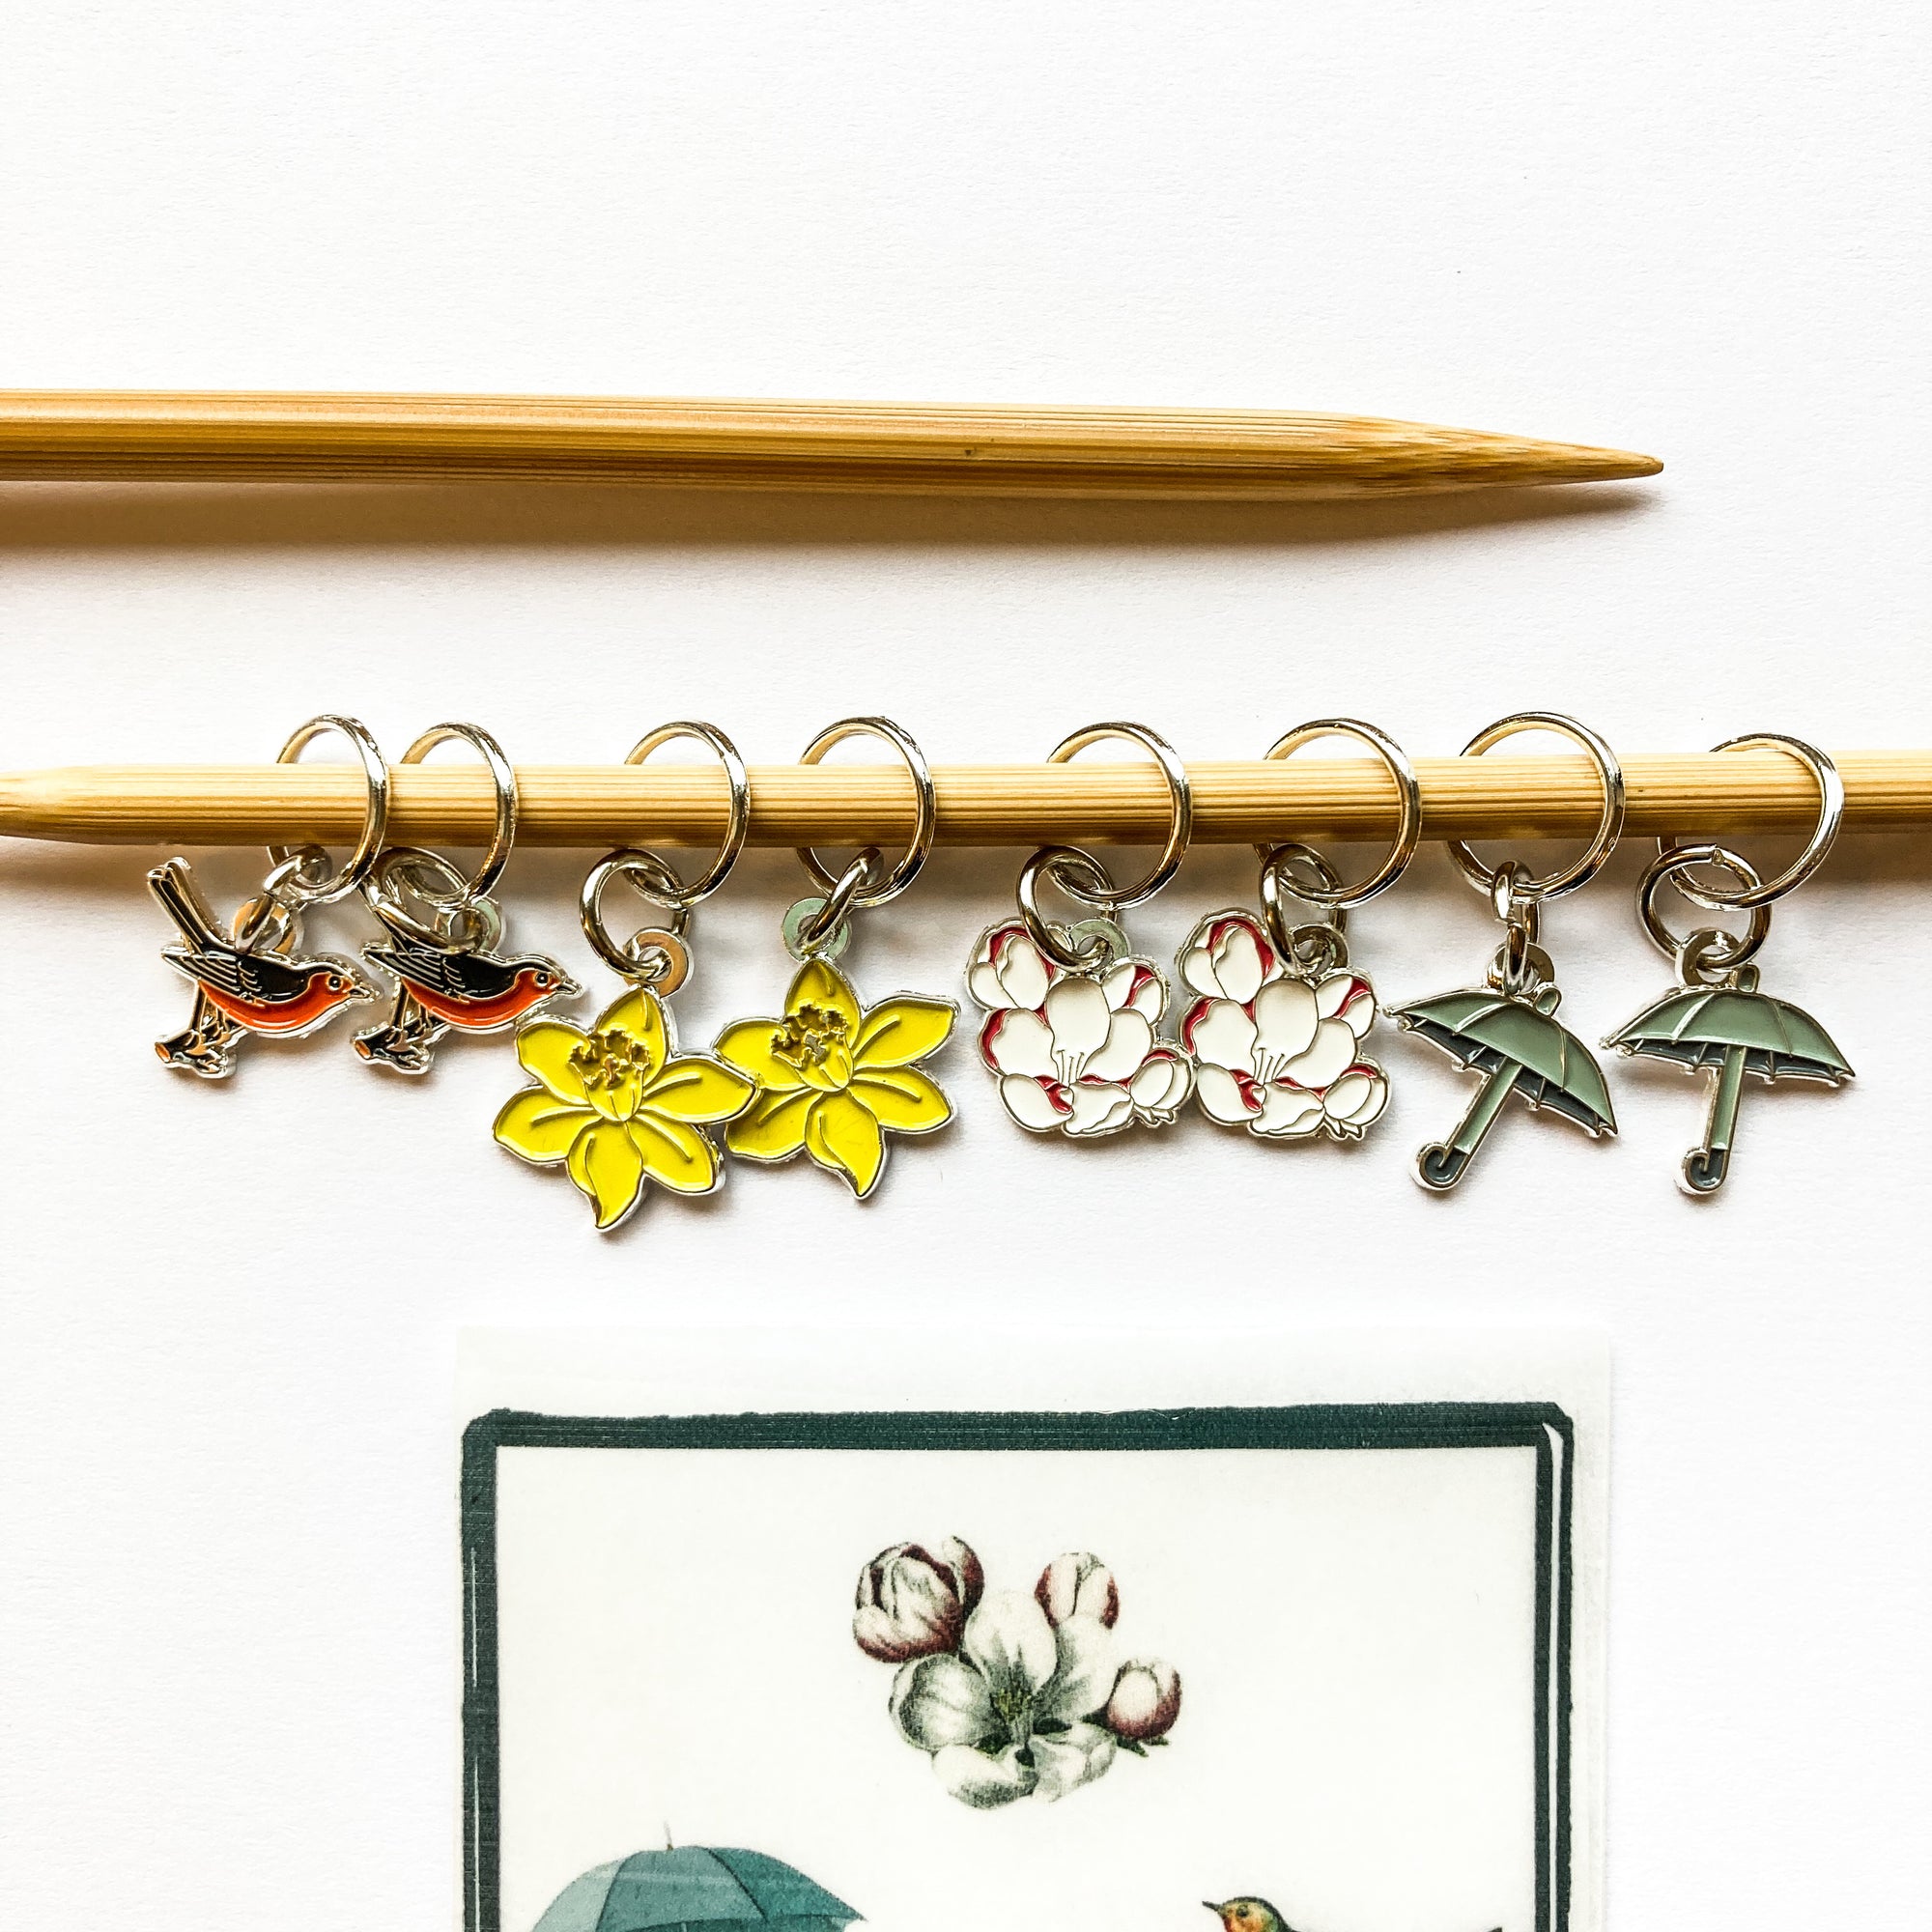 Spring stitch markers for knitting, custom Firefly Notes stitch markers